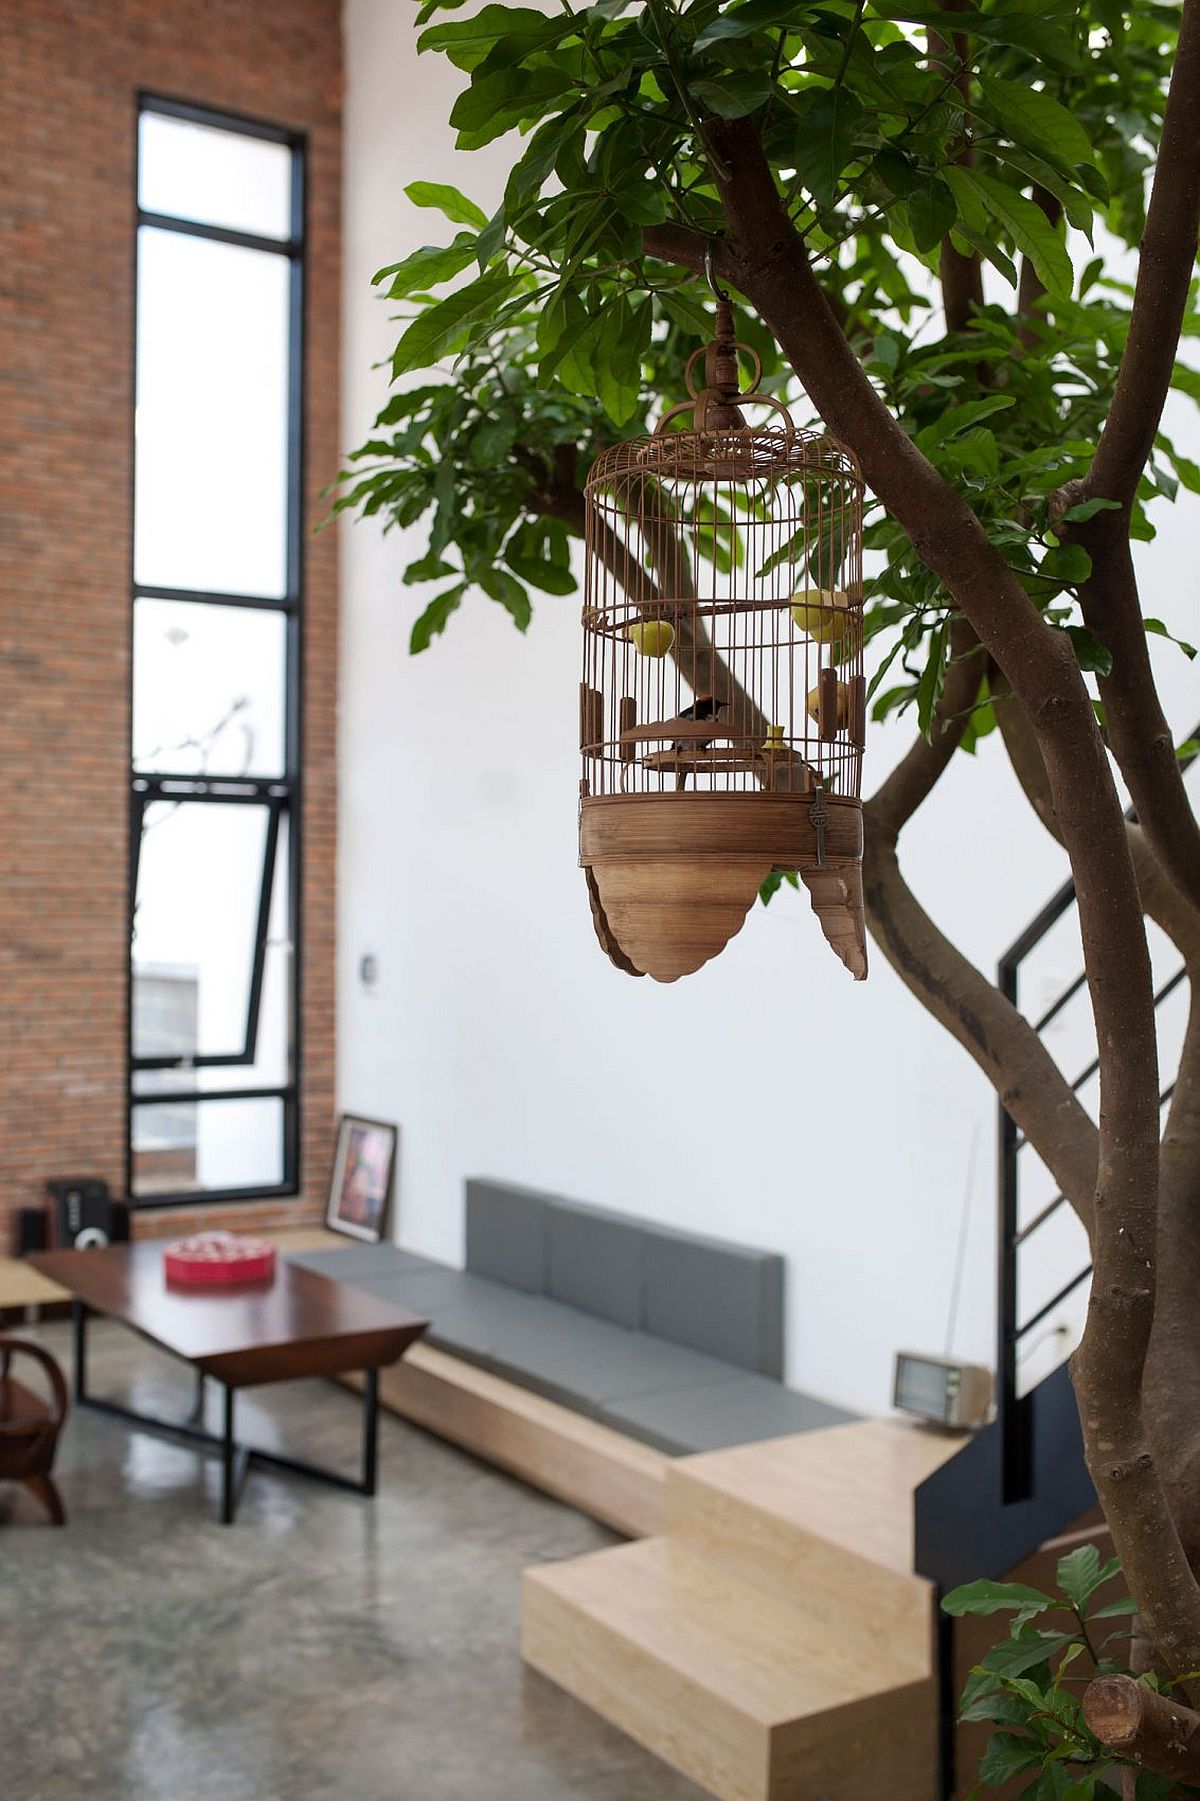 Indoor tree and cage add an interesting visual to the serene private residence